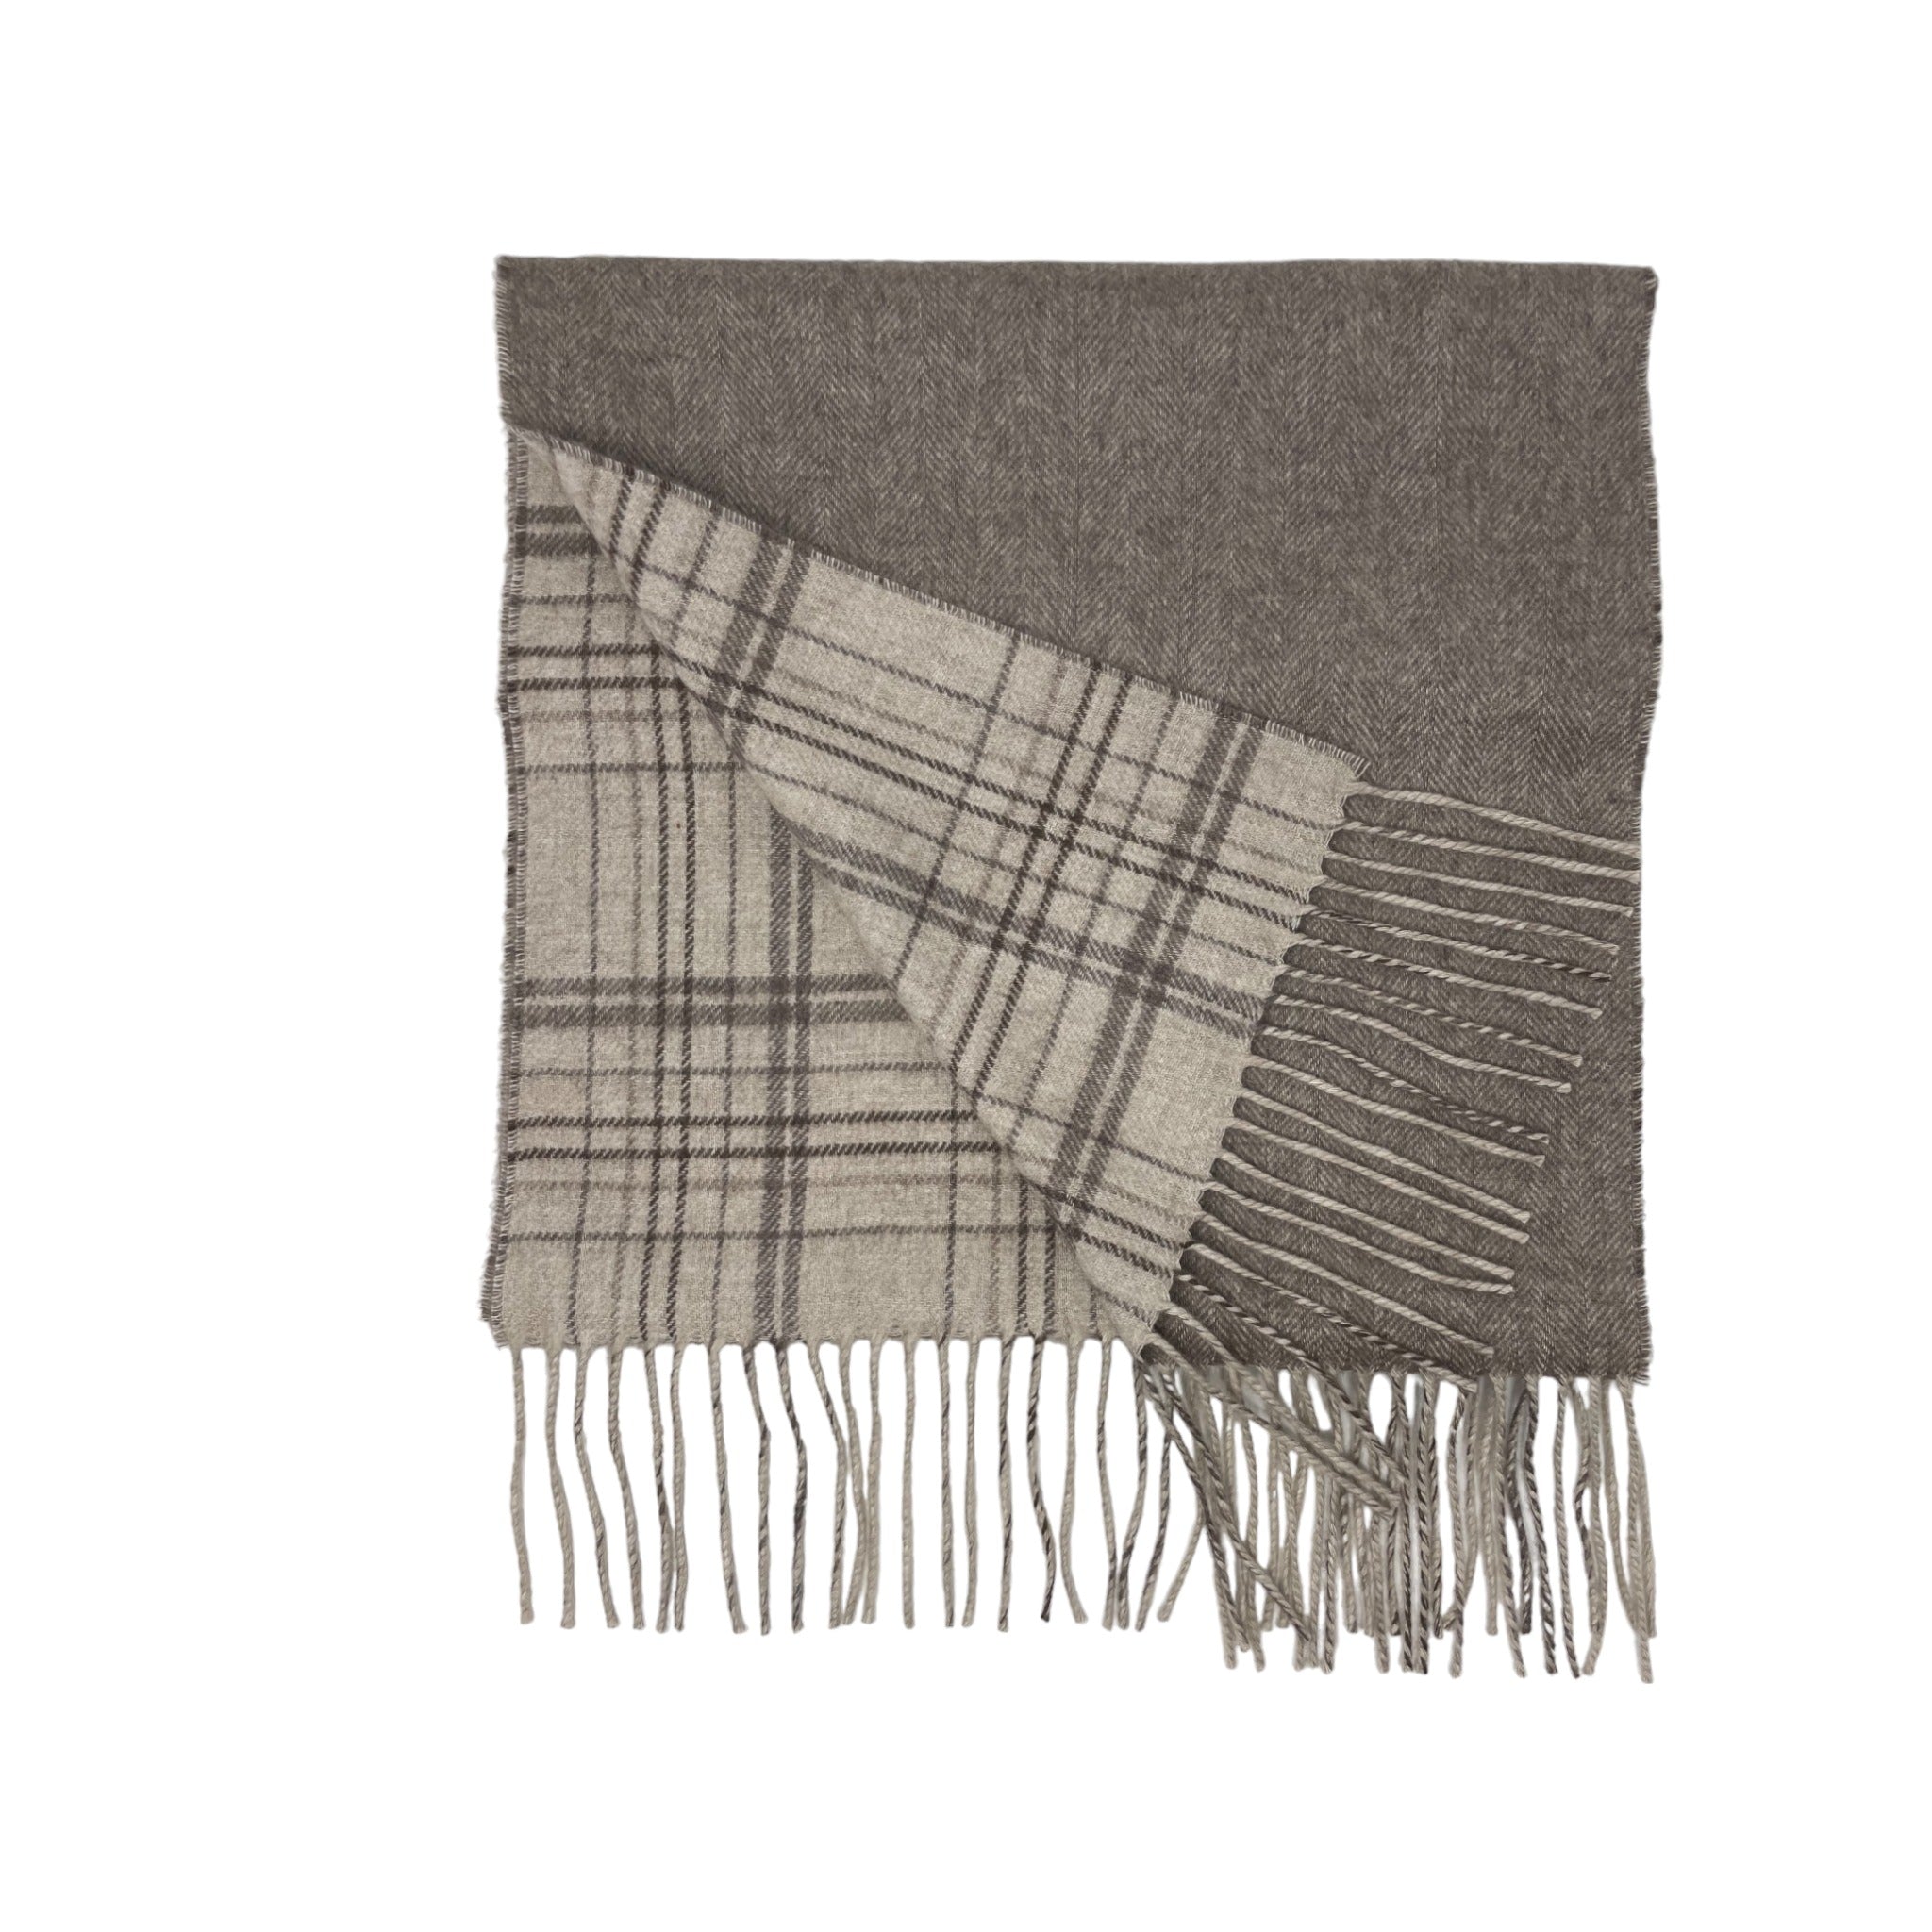 Top down photo showing front and reverse of oatmeal Mantellaro scarf